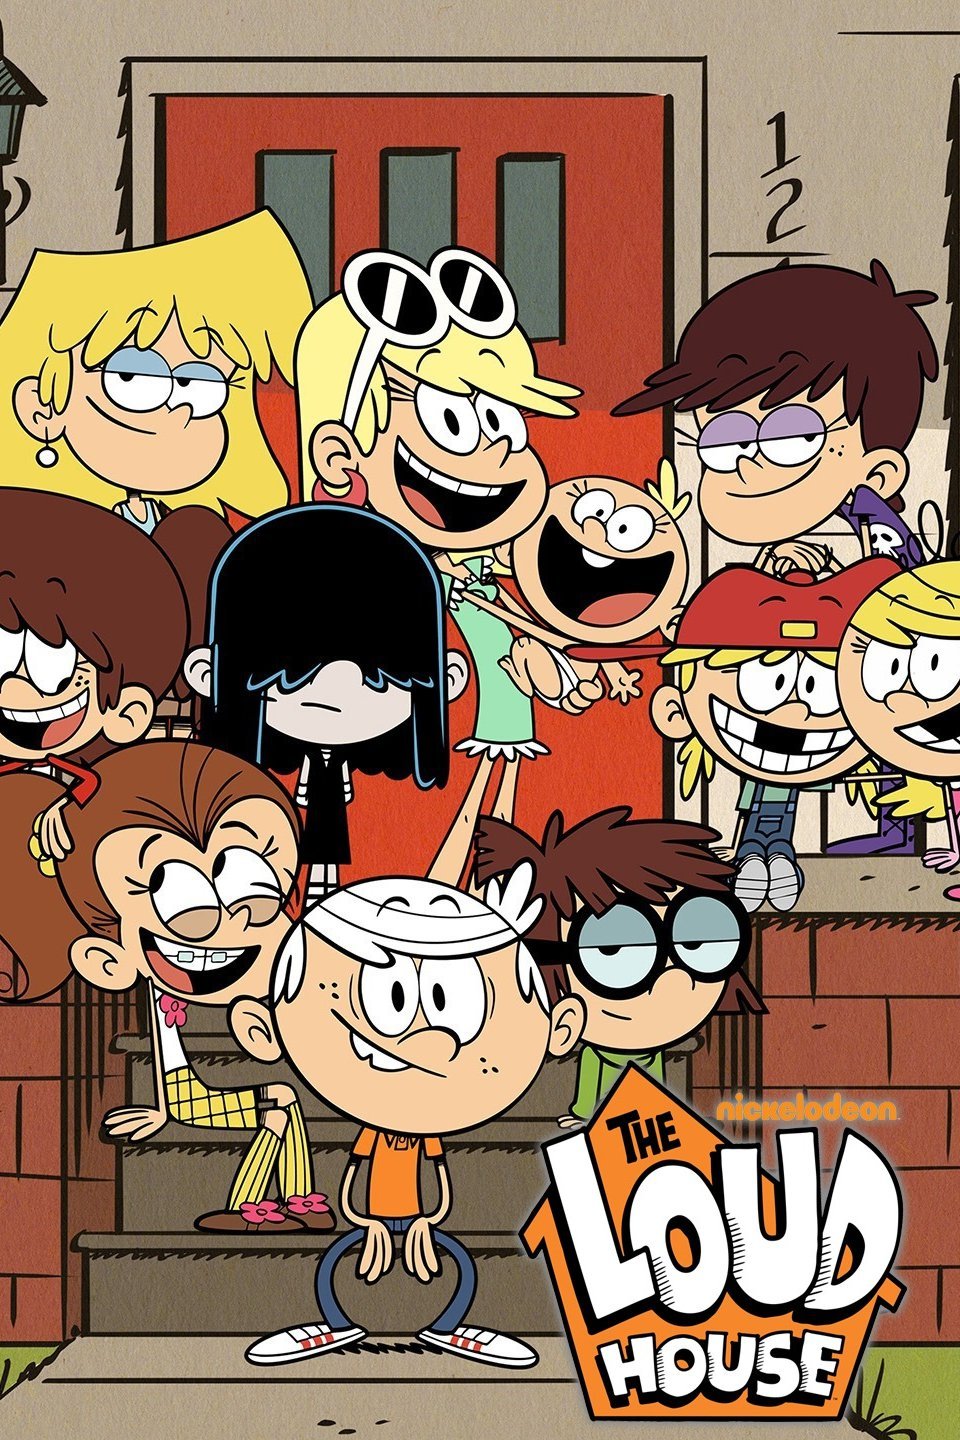 Richard Recommends: 6 Reasons To Watch The Loud House – The Cougar